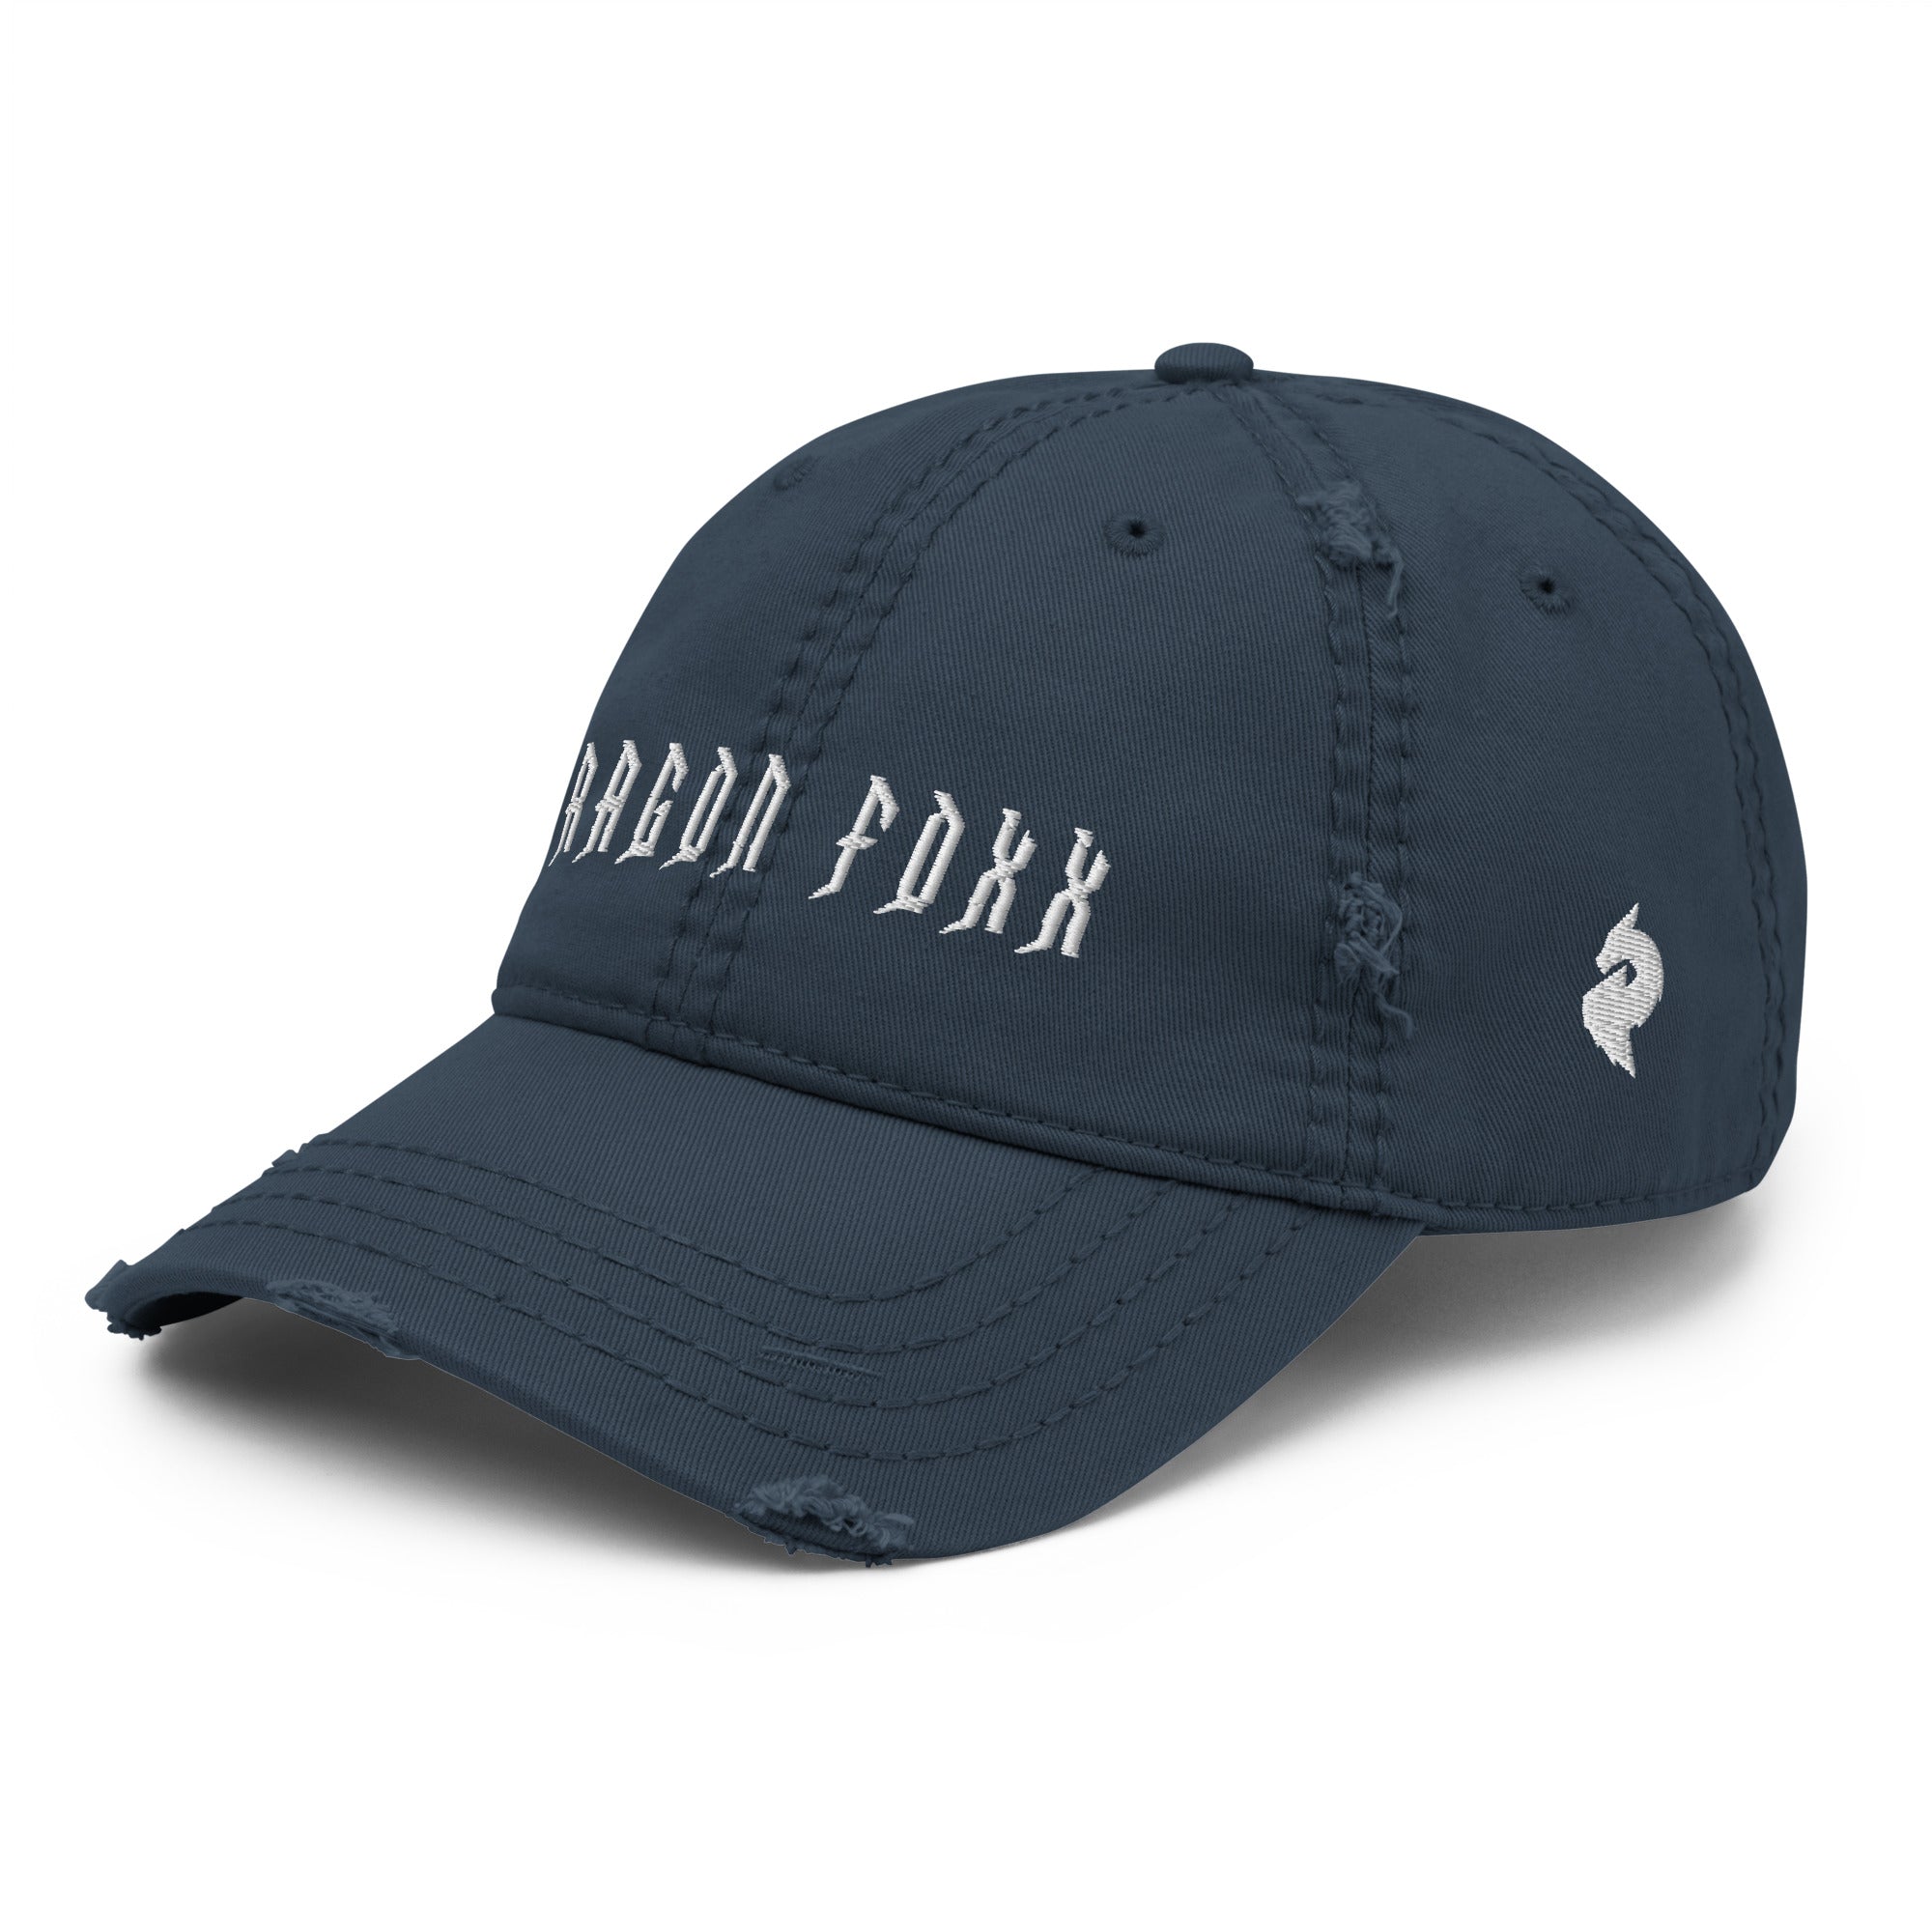 Distressed Dad Hats - White Embroidered - Distressed Dad Hat - DRAGON FOXX™ - Distressed Dad Hats - White Embroidered - 7823977_10991 - Navy - Distressed - One size - Accessories - Black Distressed Hat - Charcoal Grey Distressed Hat